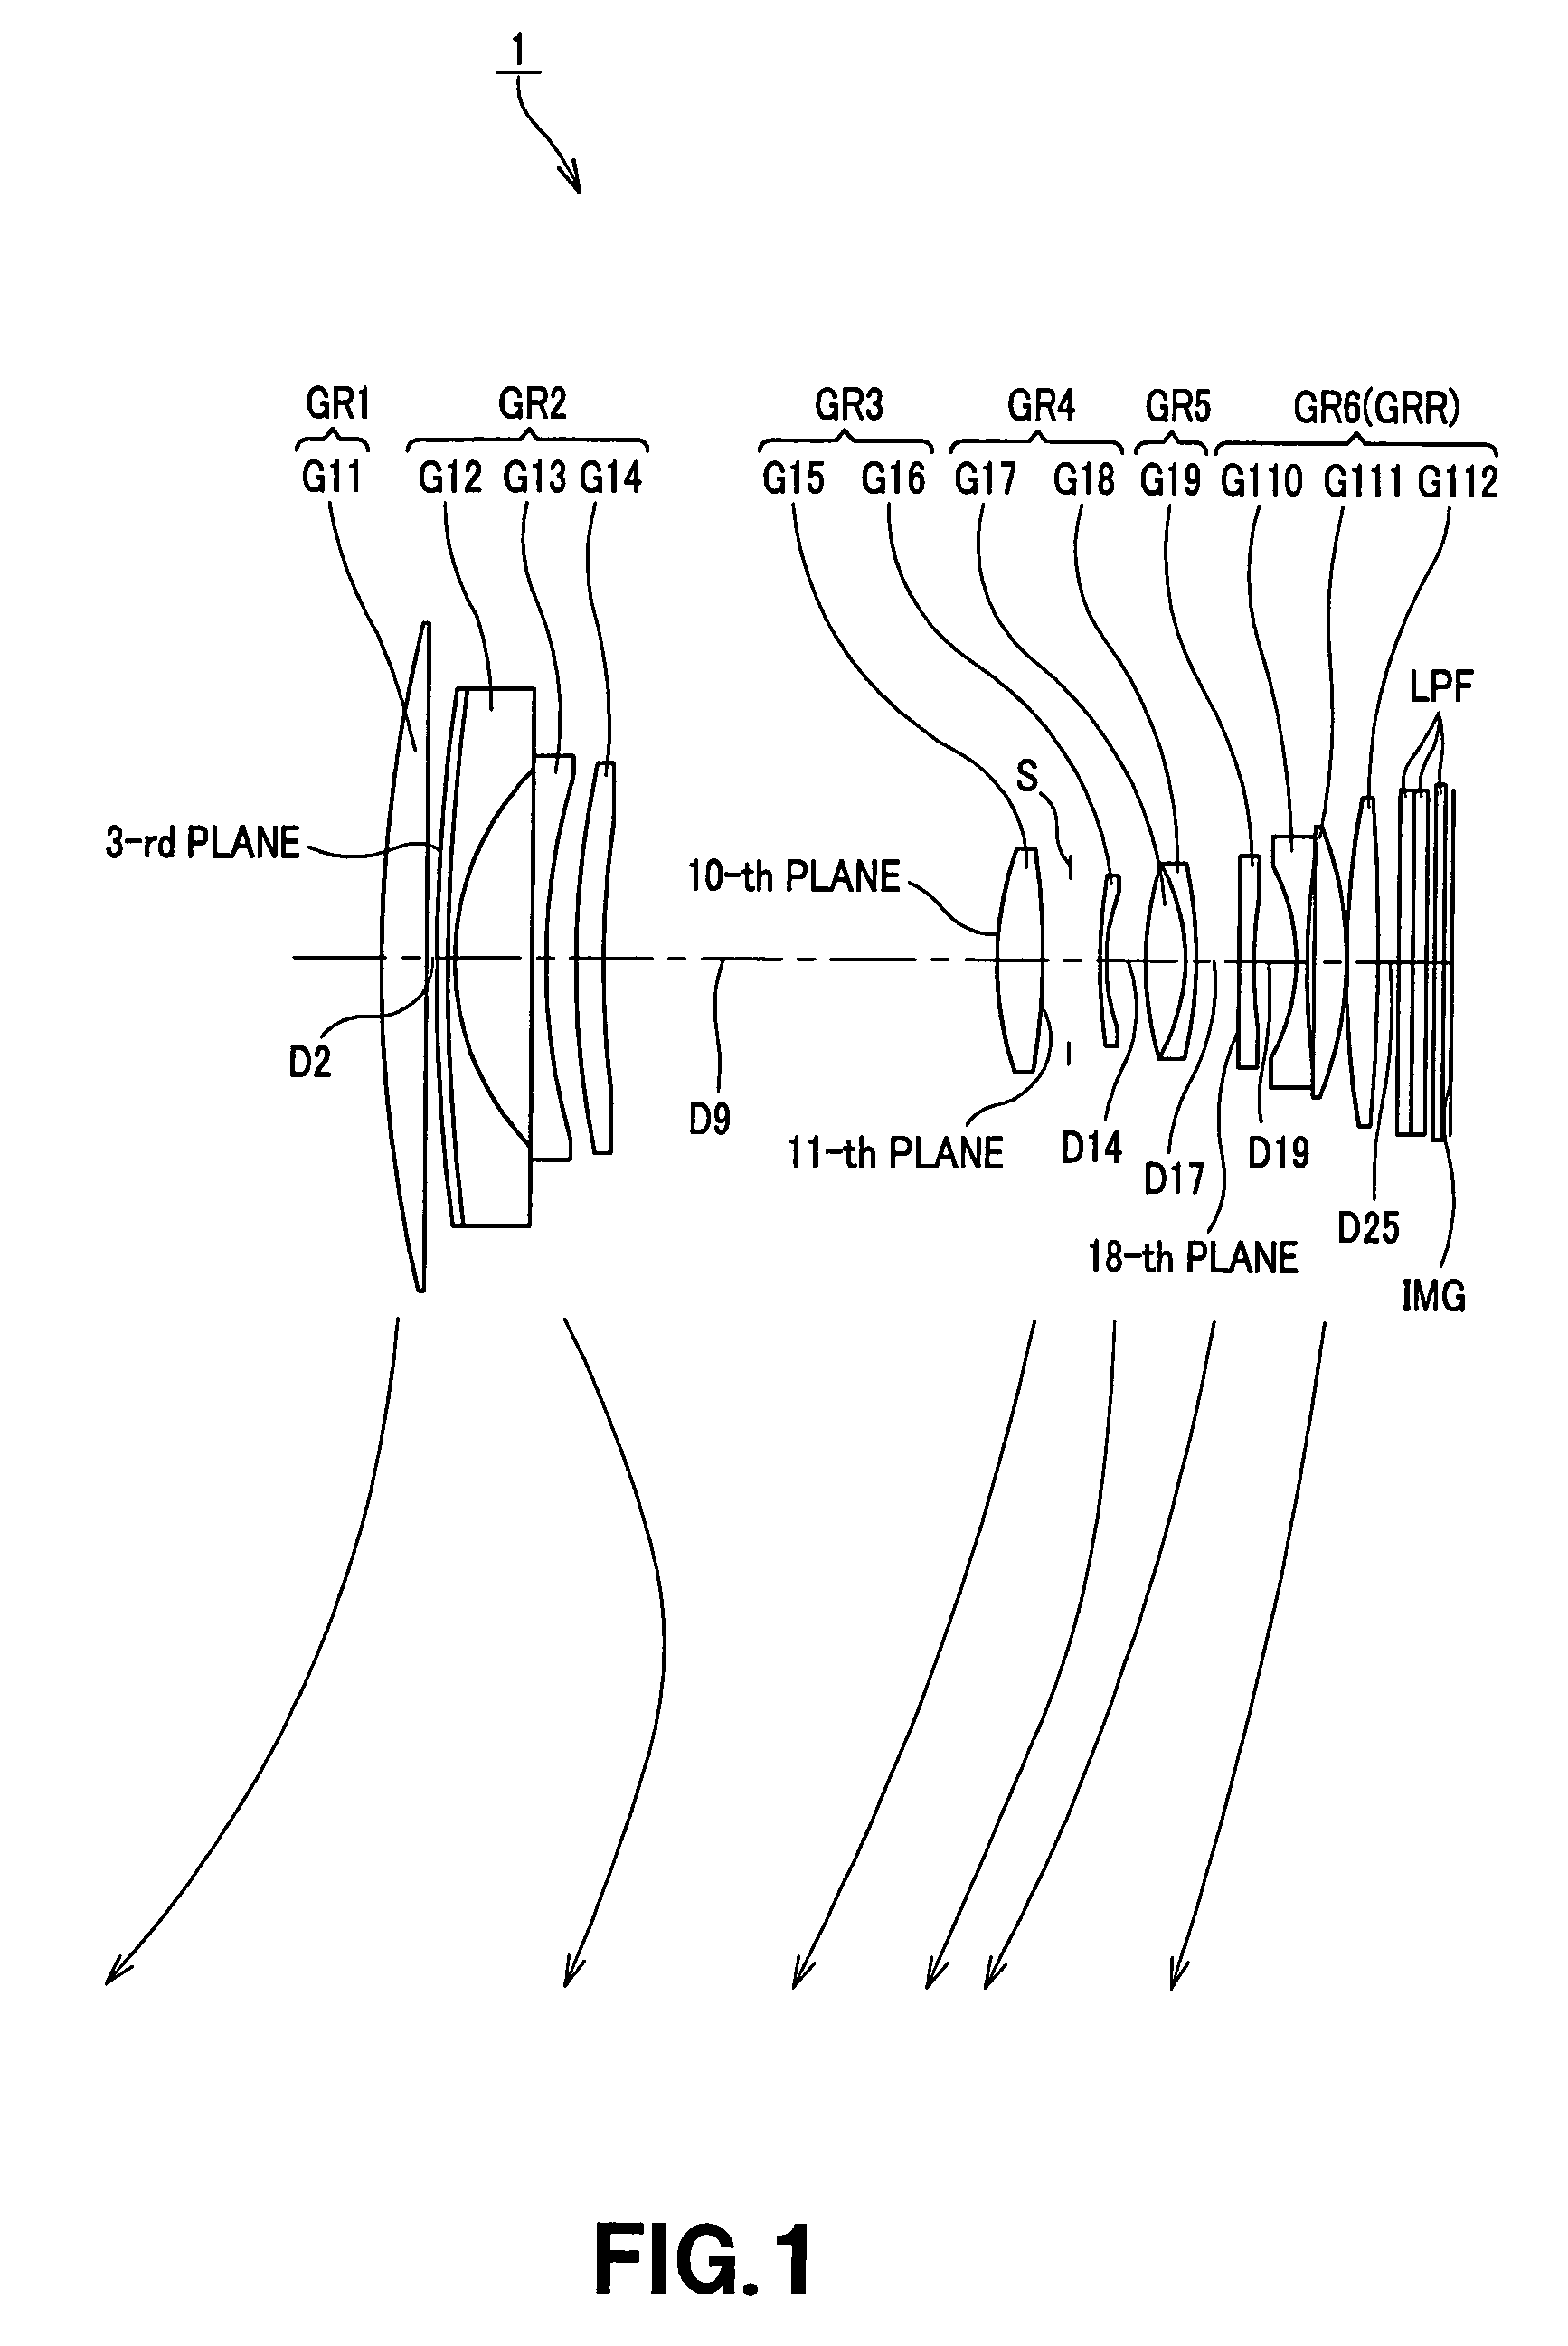 Zoom lens and image pick-up apparatus